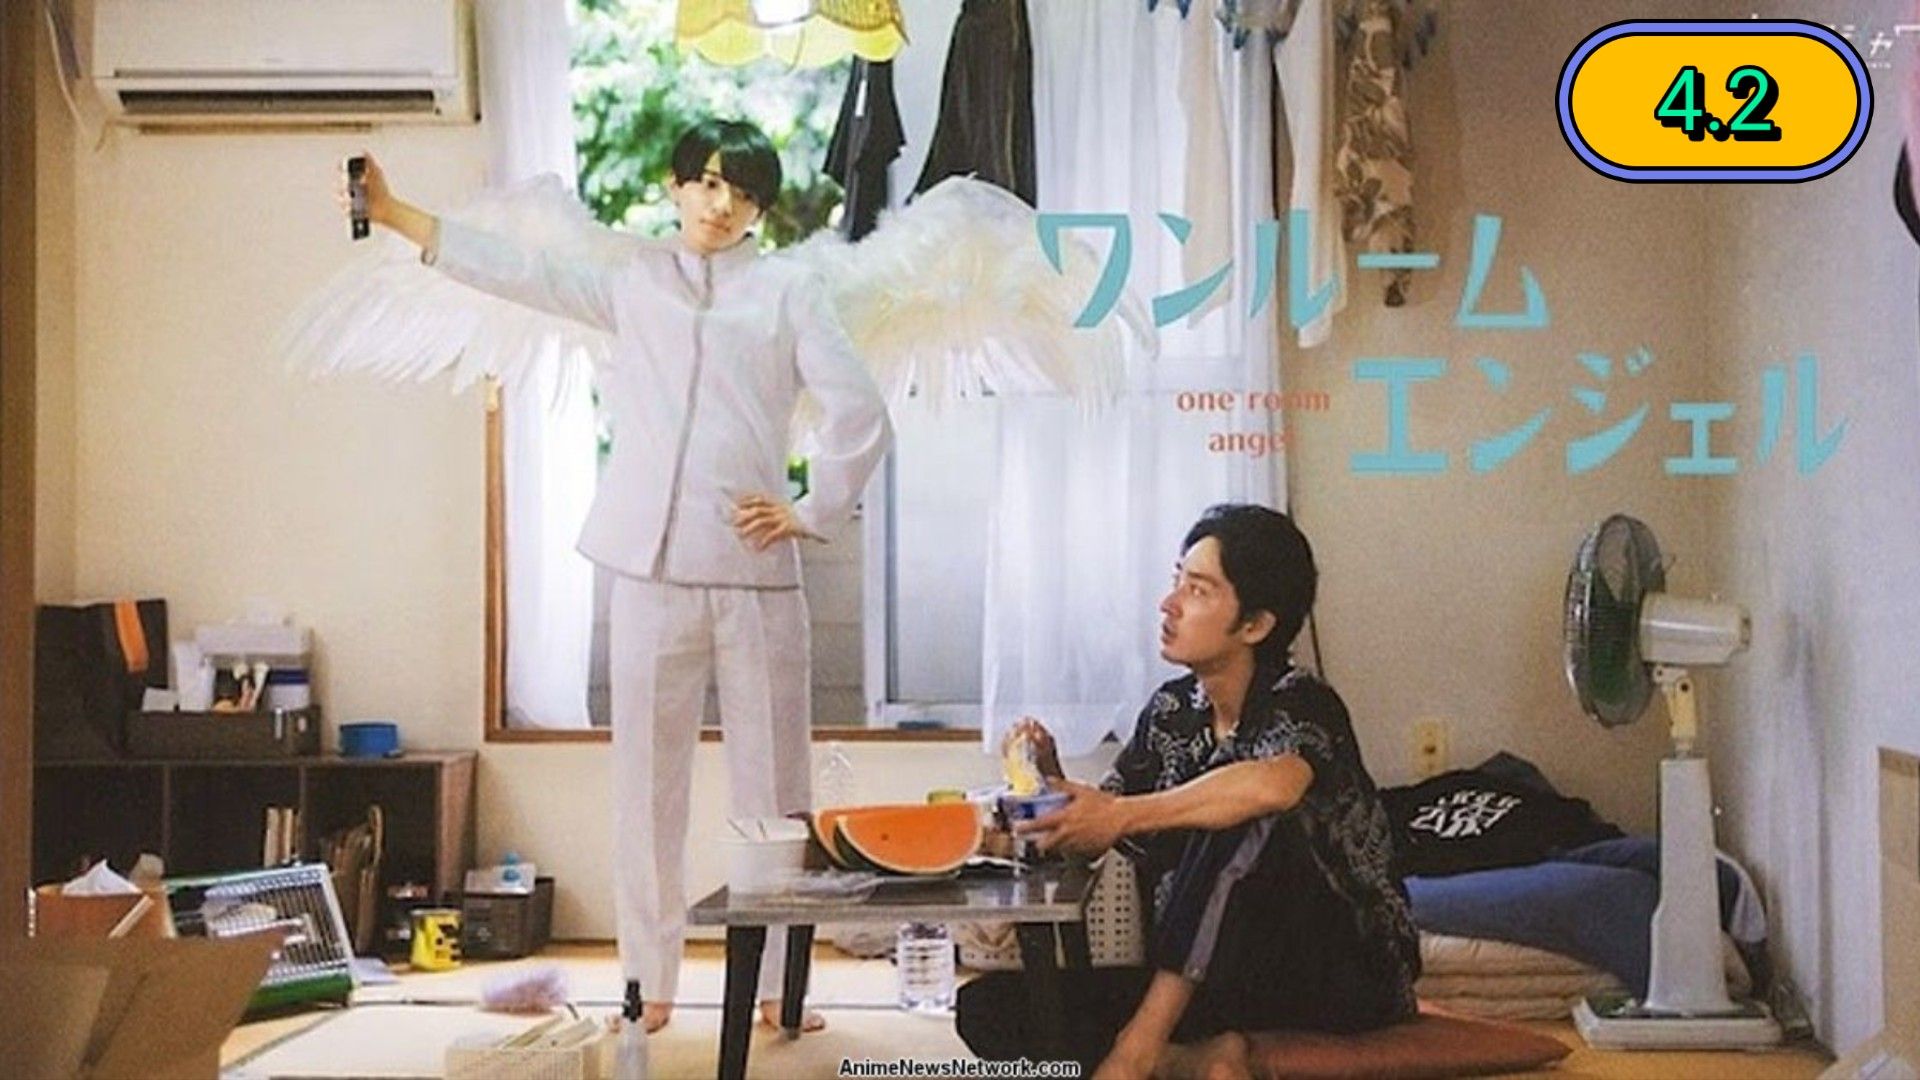 WATCH: 'One Room Angel' Unveils Main Poster, Teaser, & Opening Song - BLTai